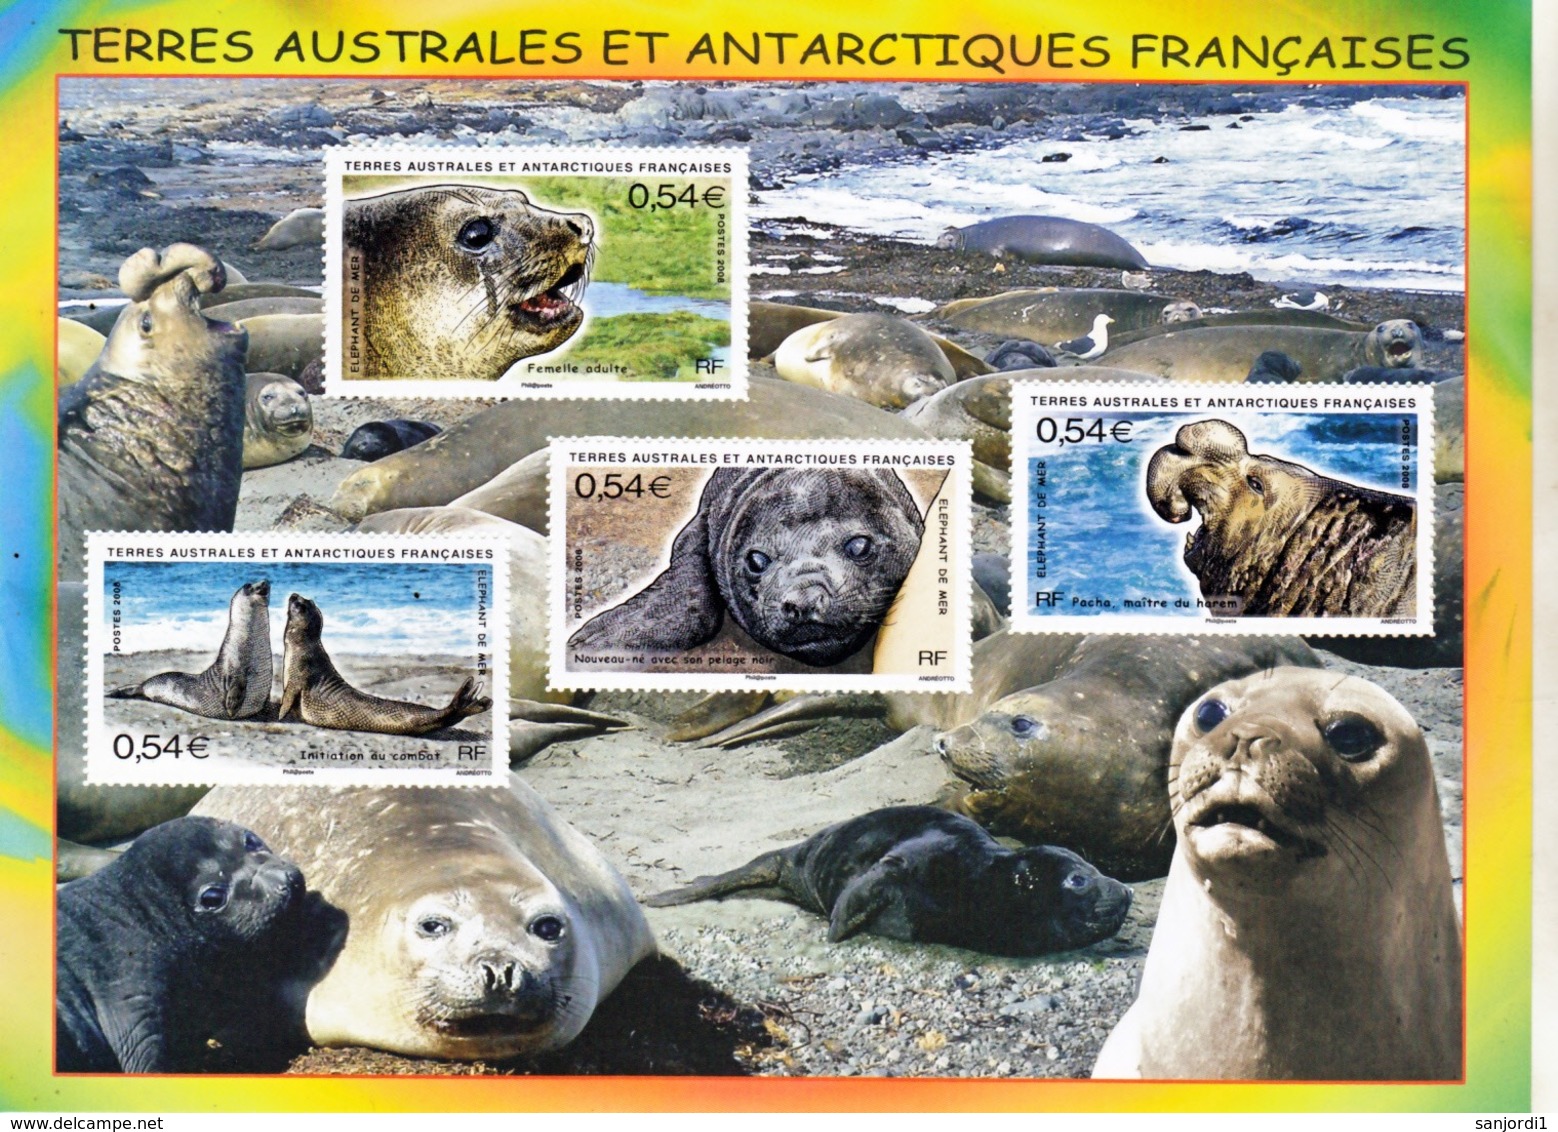 TAAF 2008 Année Complète Avec BF  Neuf ** TB MNH Sin Charnela - Años Completos